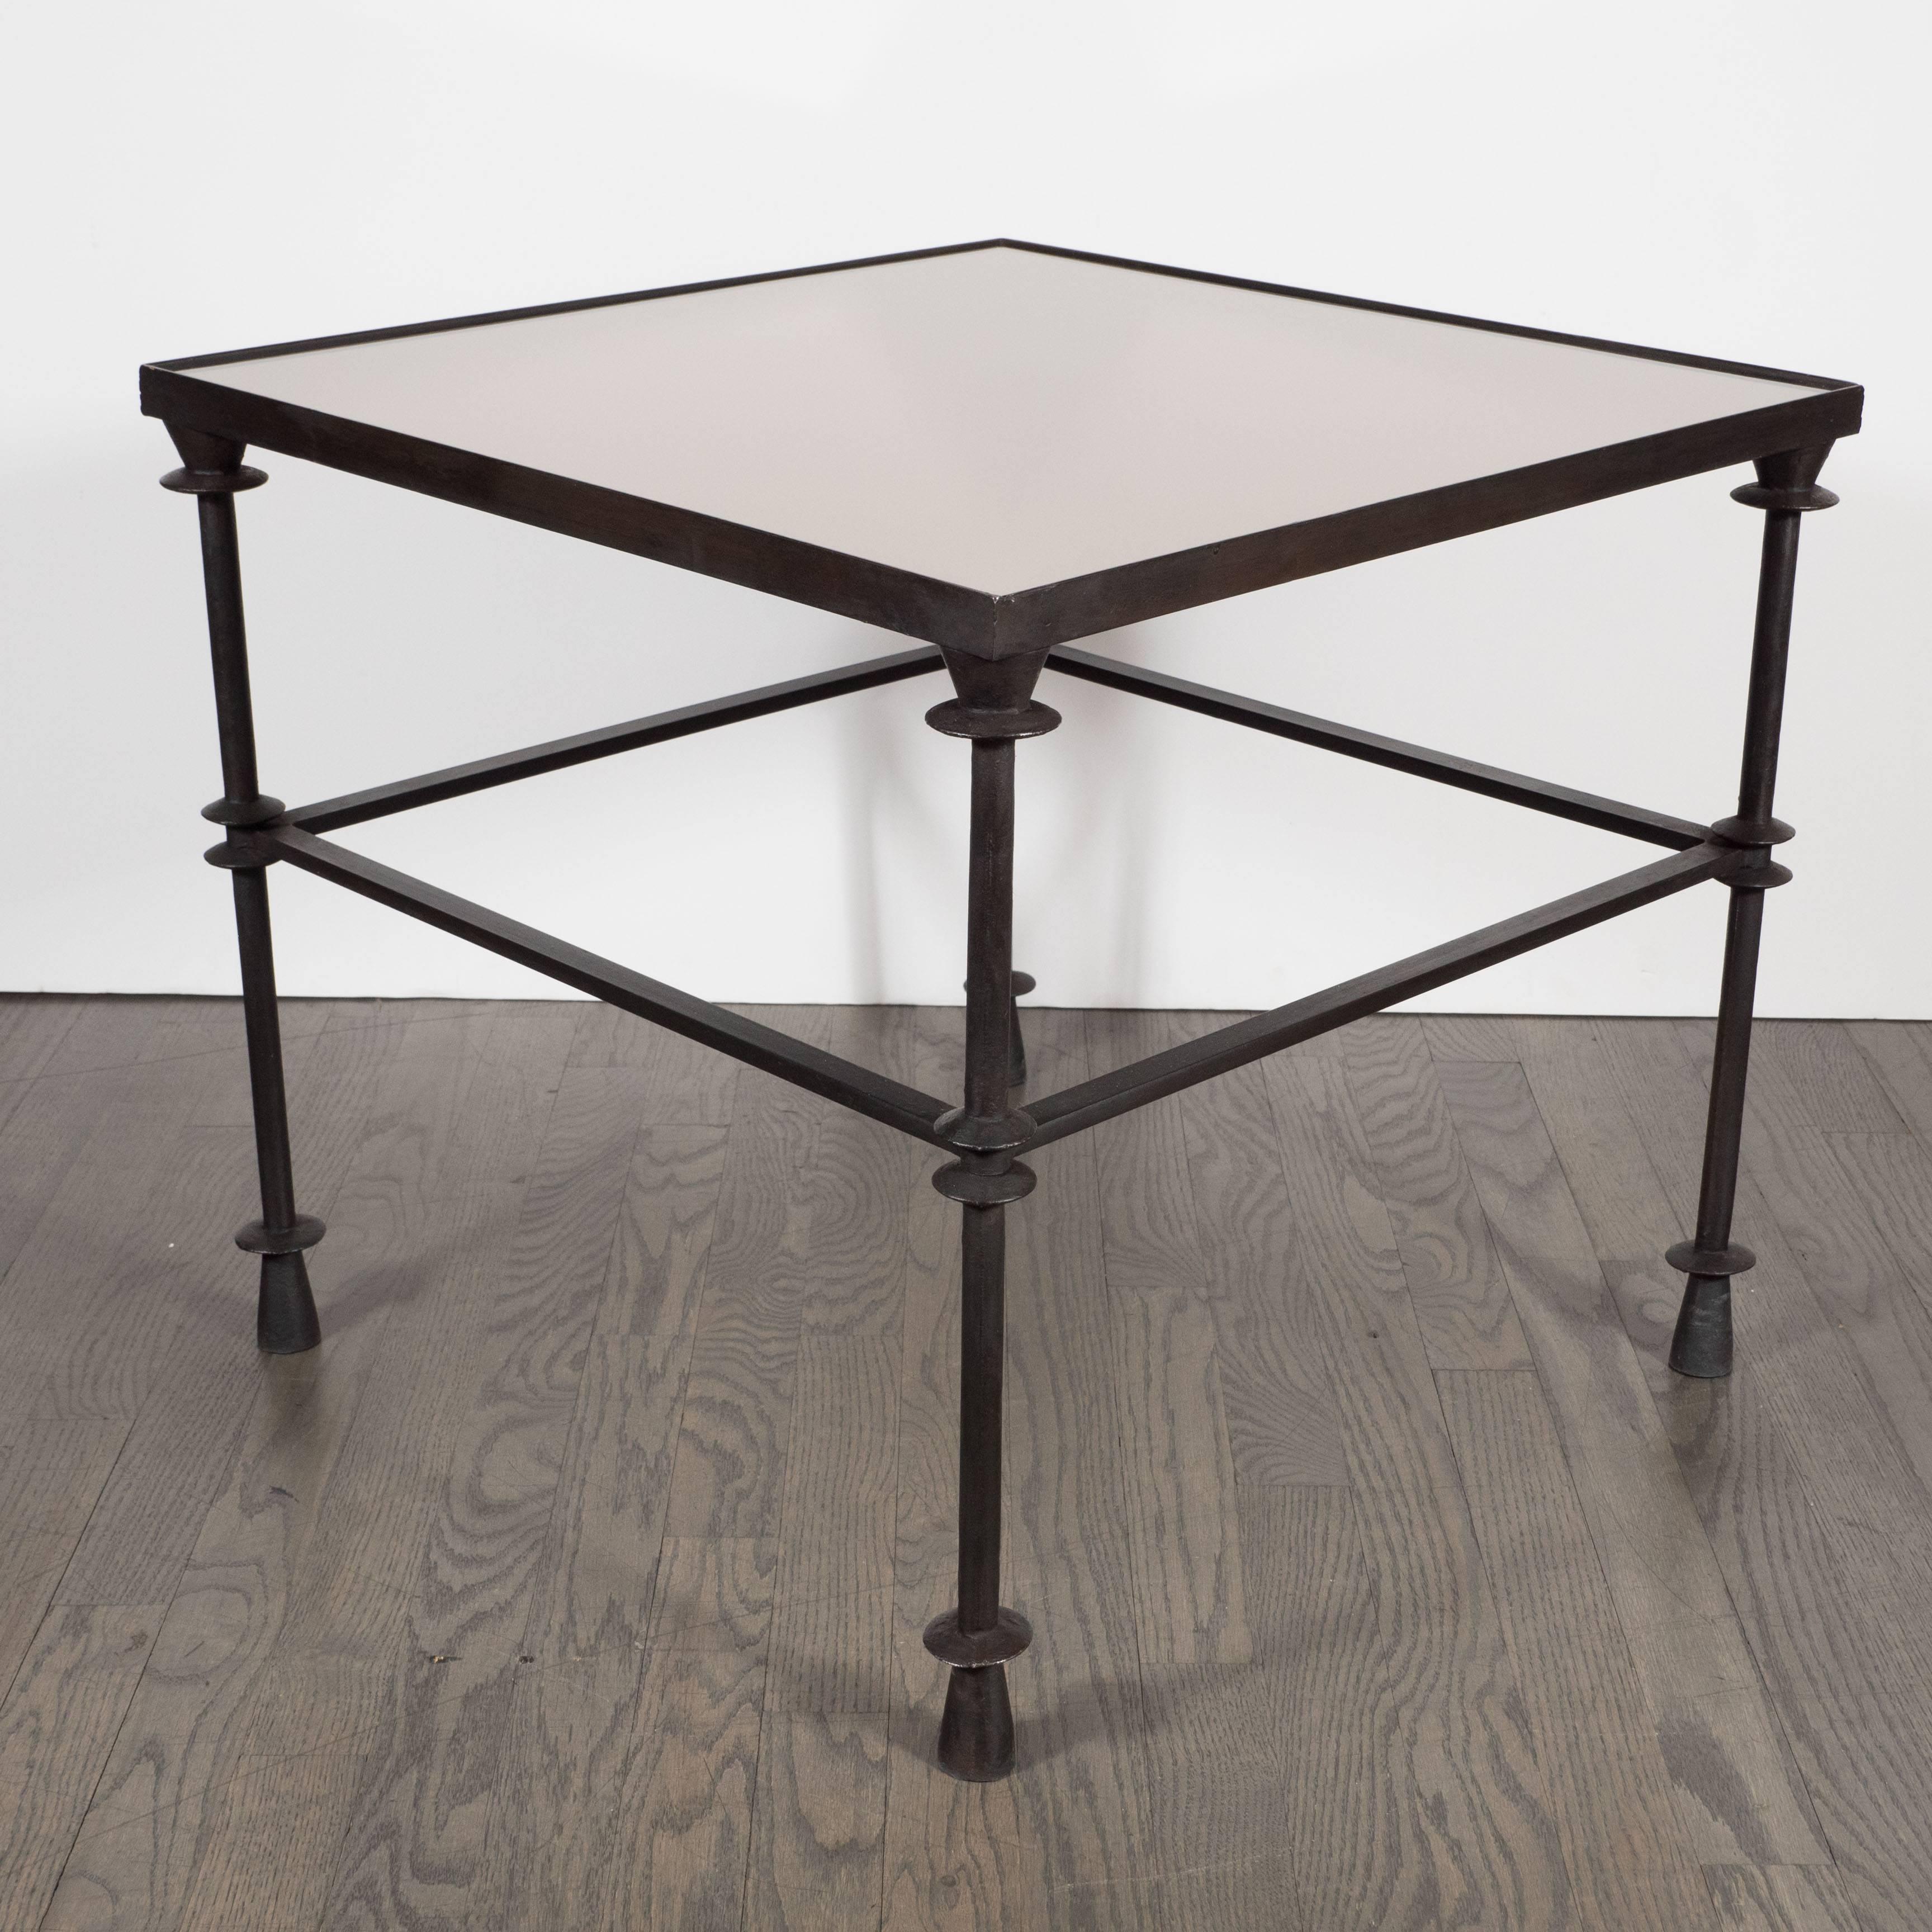 Mid-Century Modern Iron Cocktail Table with Inset Bronze Mirror in the Style of Giacometti